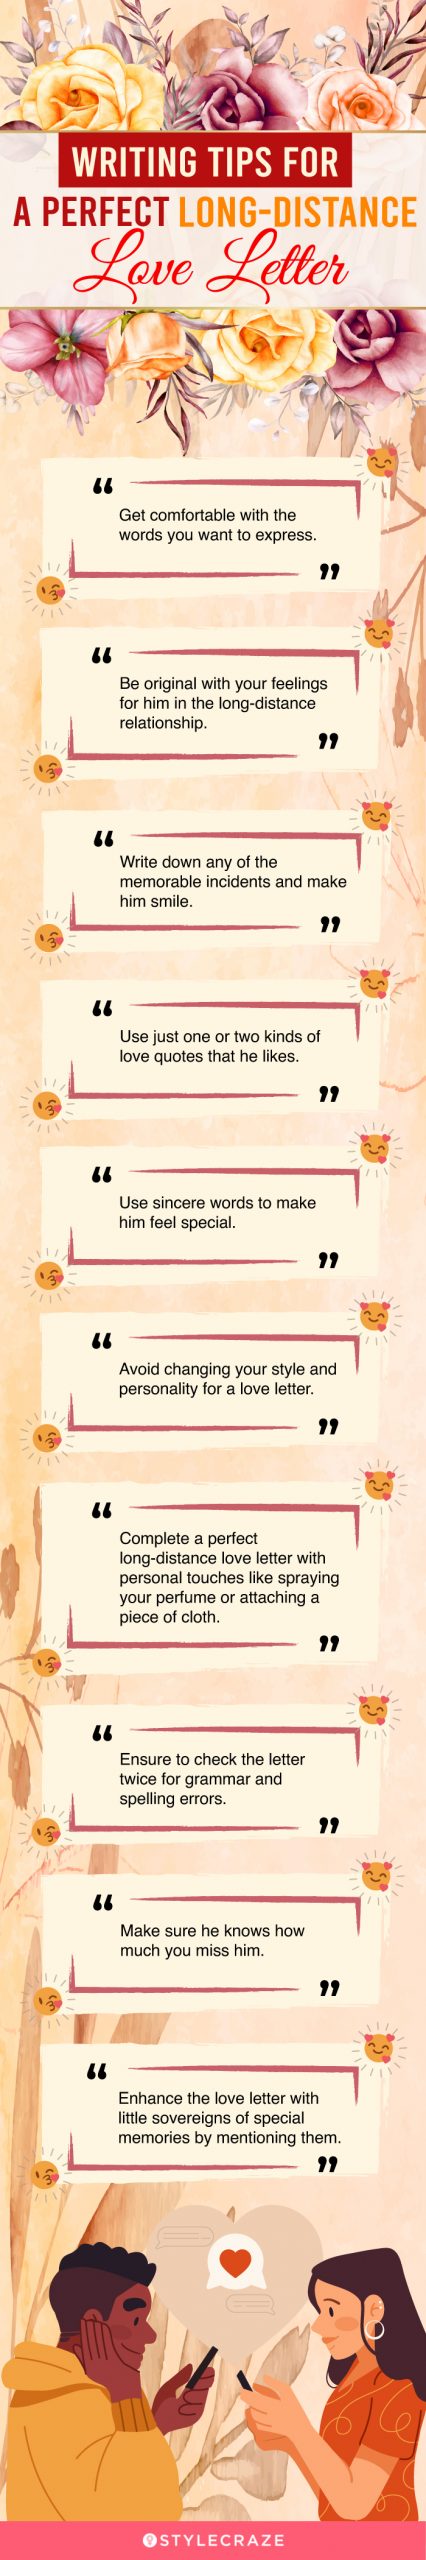 writing tips for a perfect long distance love letter (infographic)